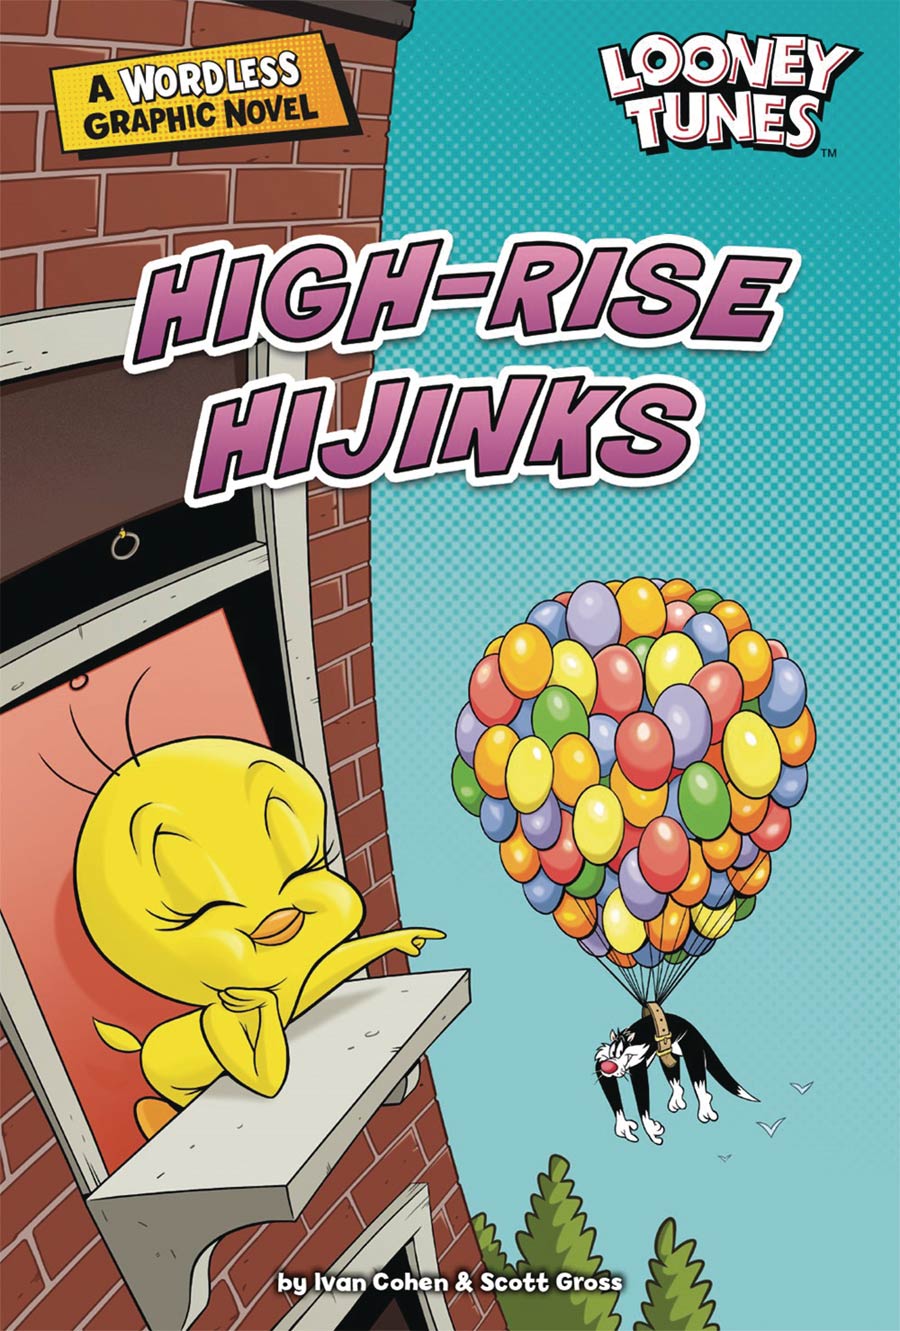 Looney Tunes A Wordless Graphic Novel High-Rise Hijinks TP